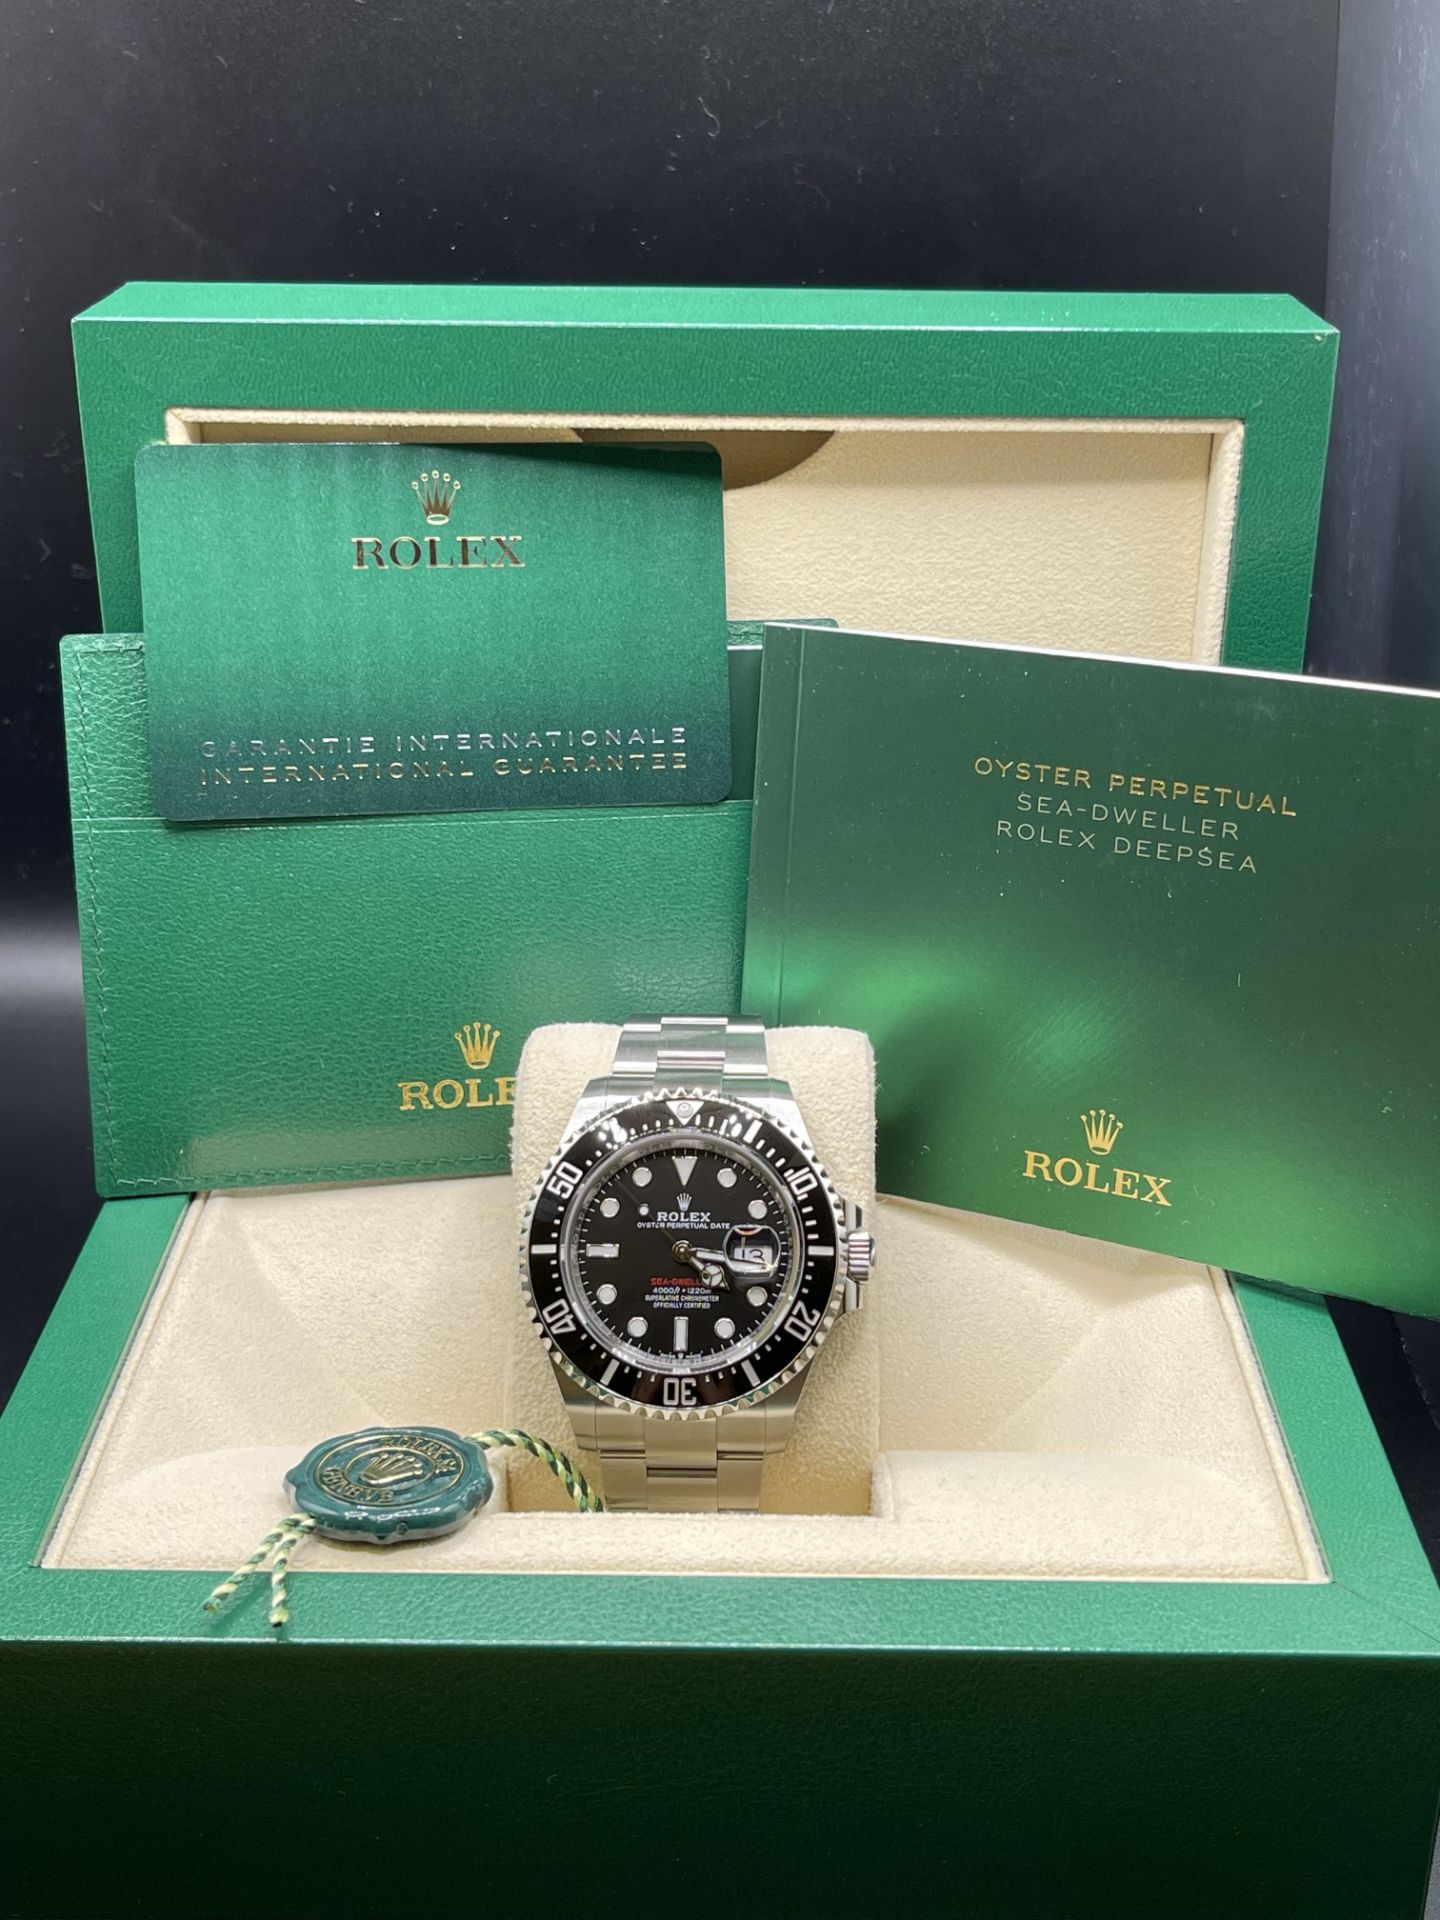 ** ON SALE ** Rolex Sea Dweller Oyster Perpetual Oystersteel - Oyster Bracelet 2022 - Brand New - Image 3 of 25